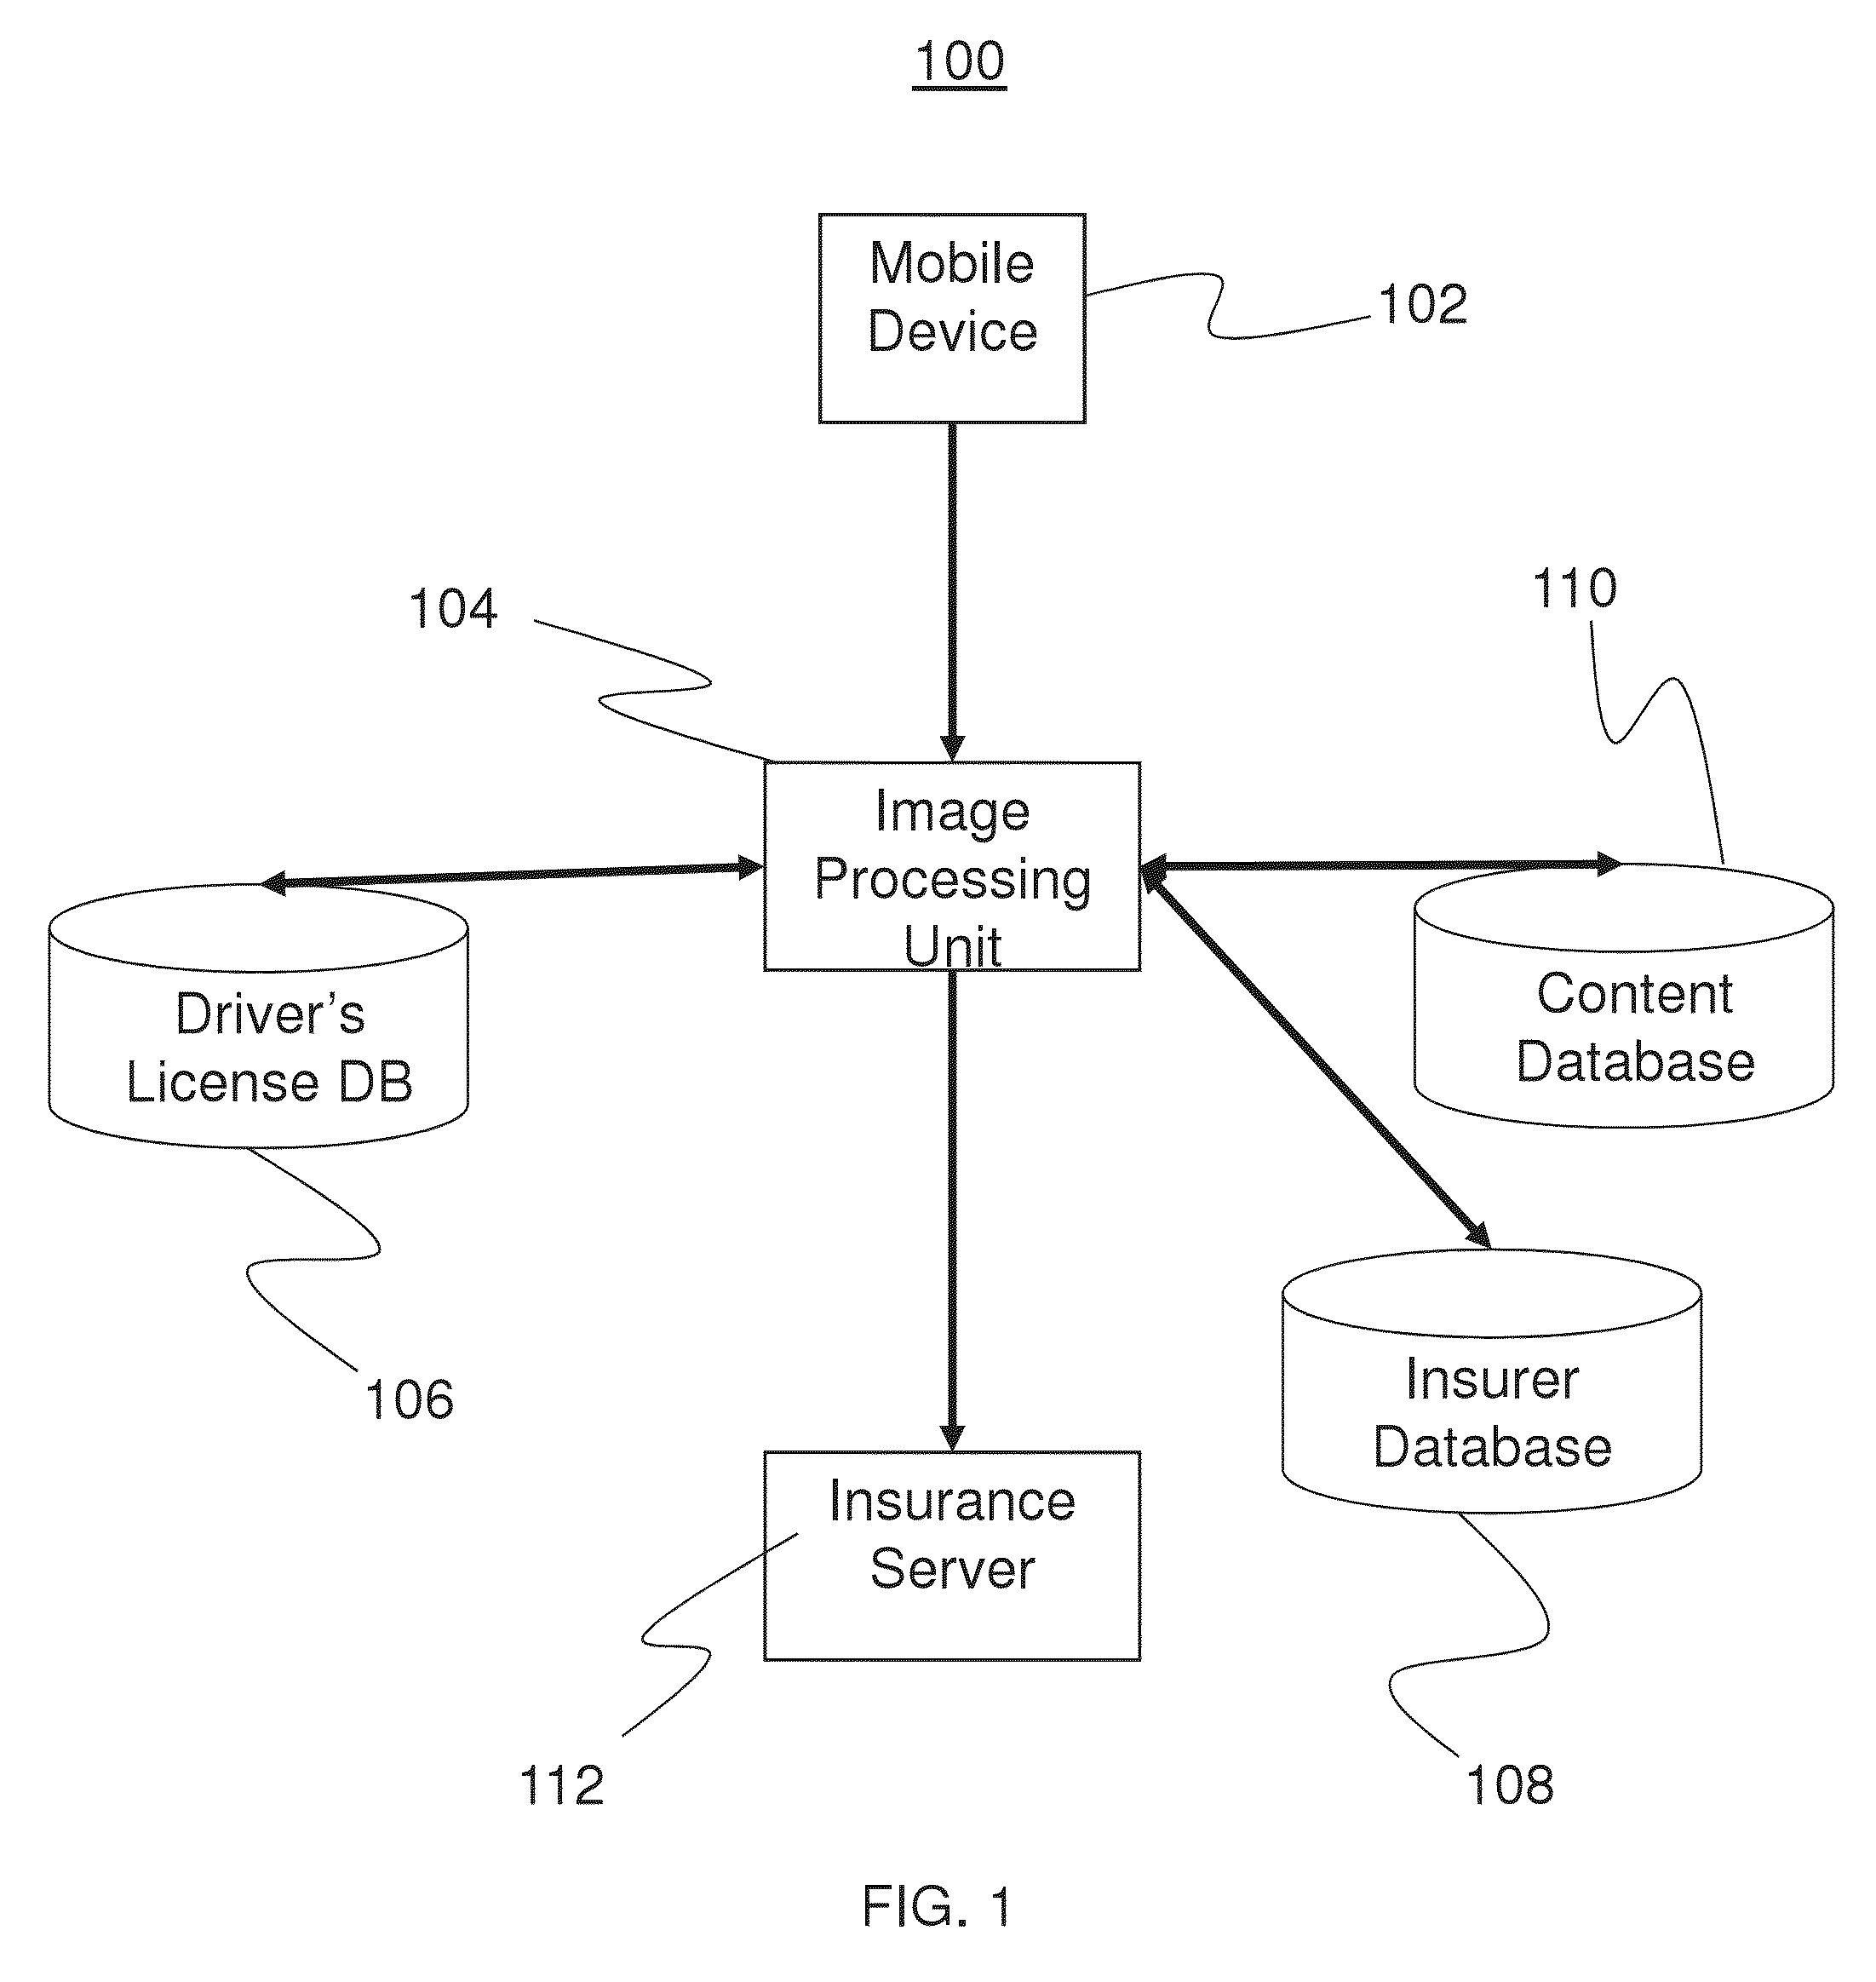 Systems and methods for filing insurance claims using mobile imaging